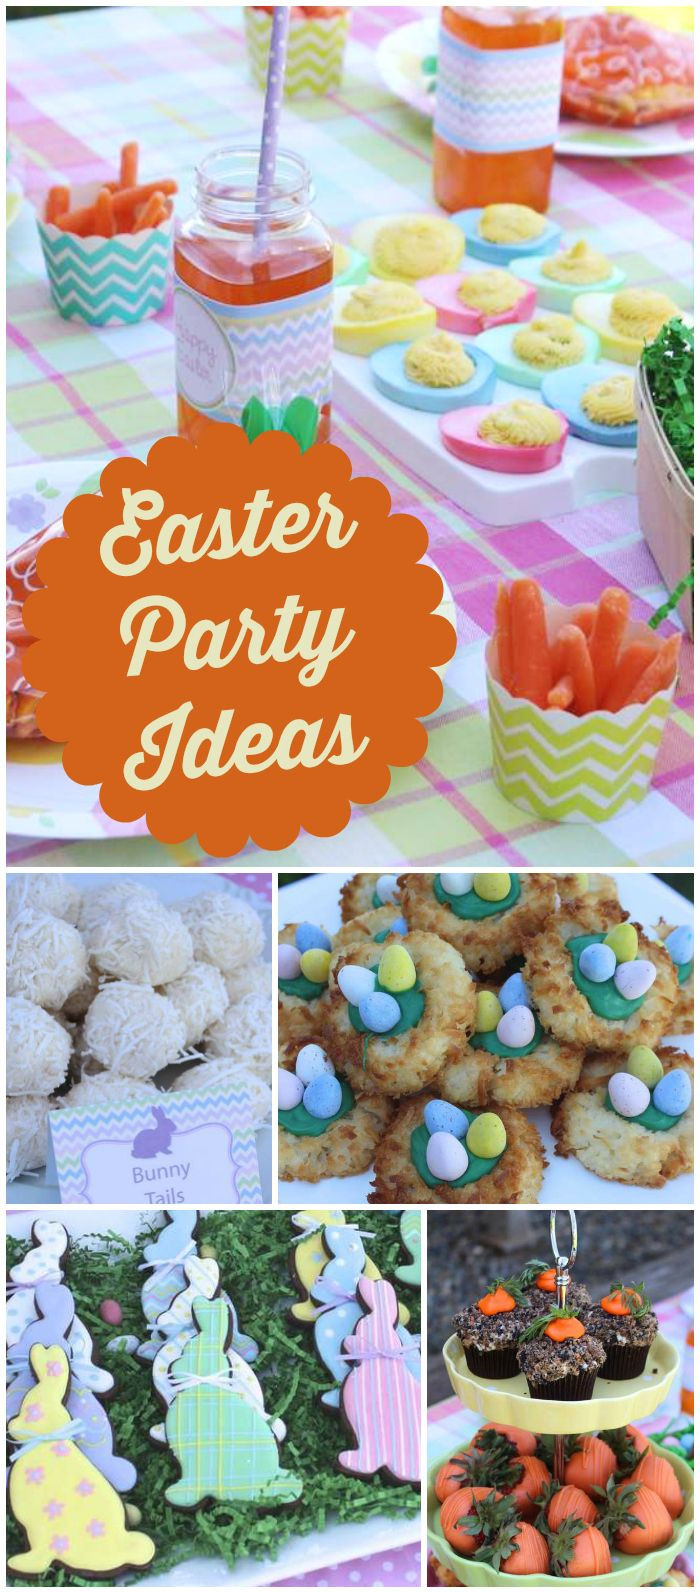 Easter Church Party Ideas
 1000 ideas about Egg Hunt on Pinterest